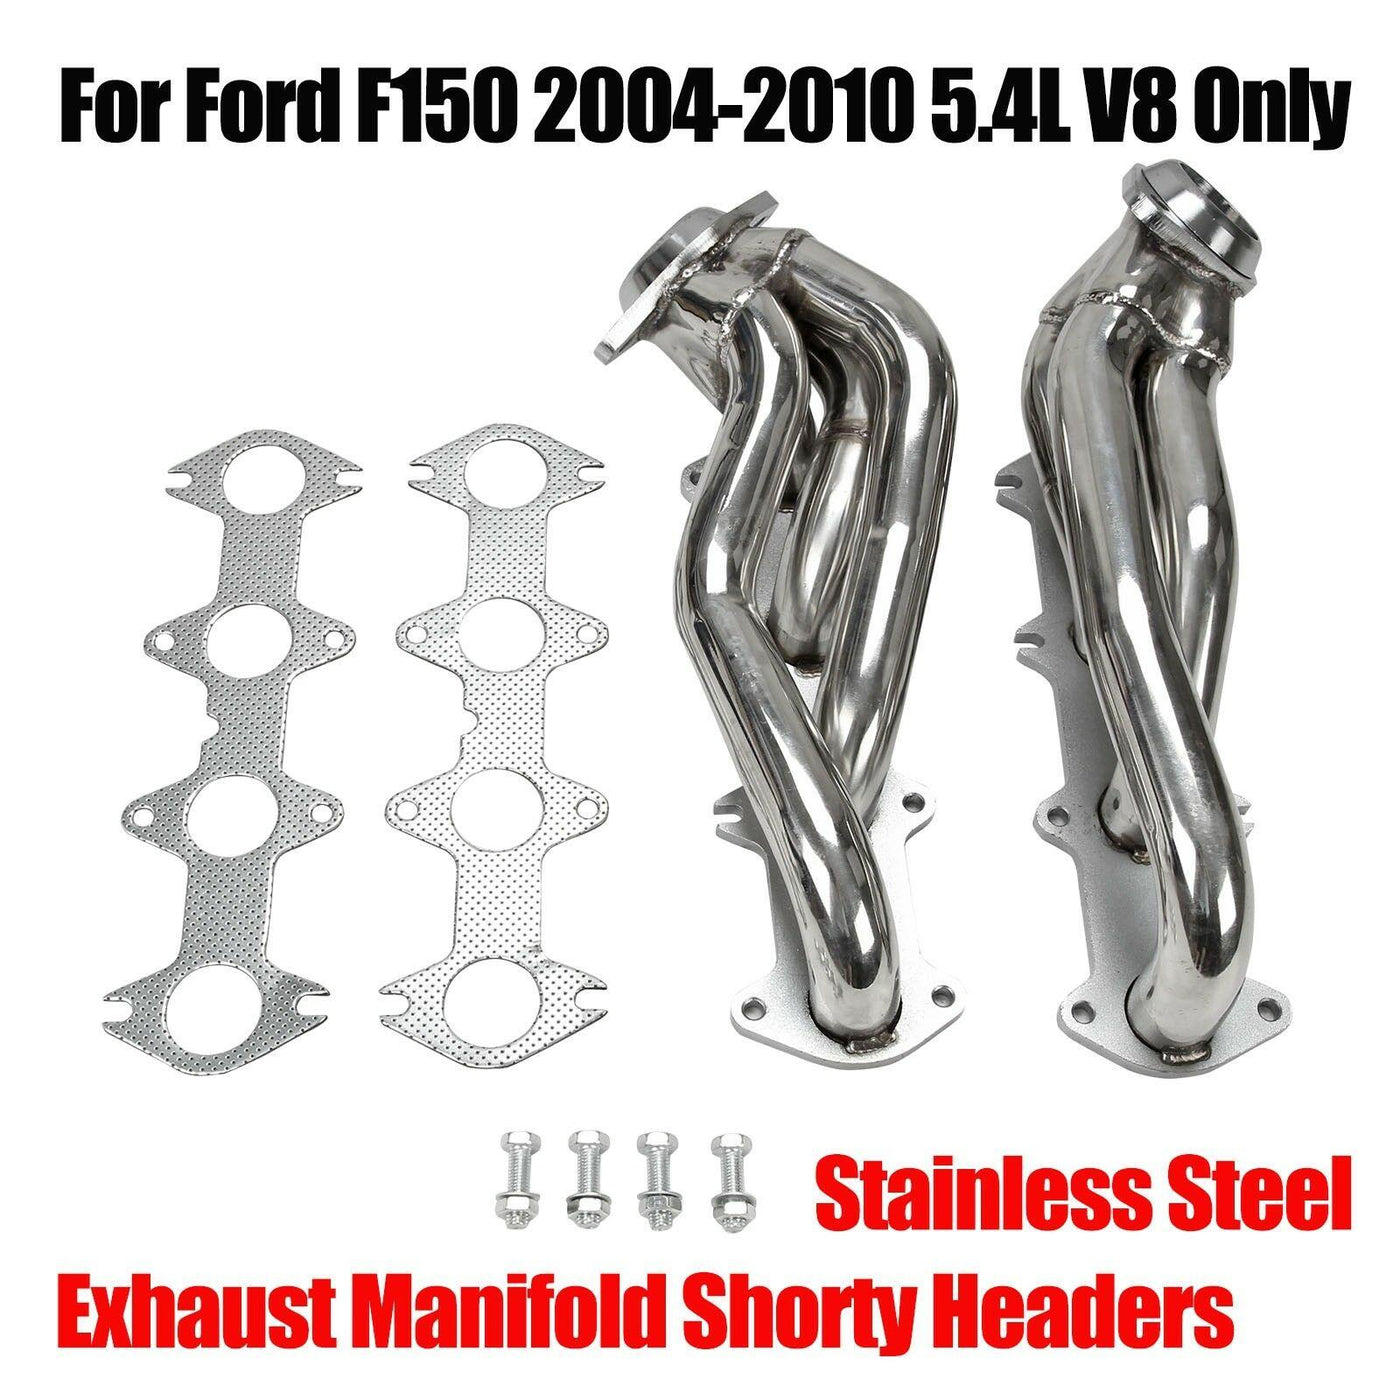 For Ford F150 04-10 5.4L V8 Stainless Exhaust Manifold Shorty Headers manifold - Moto Life Products